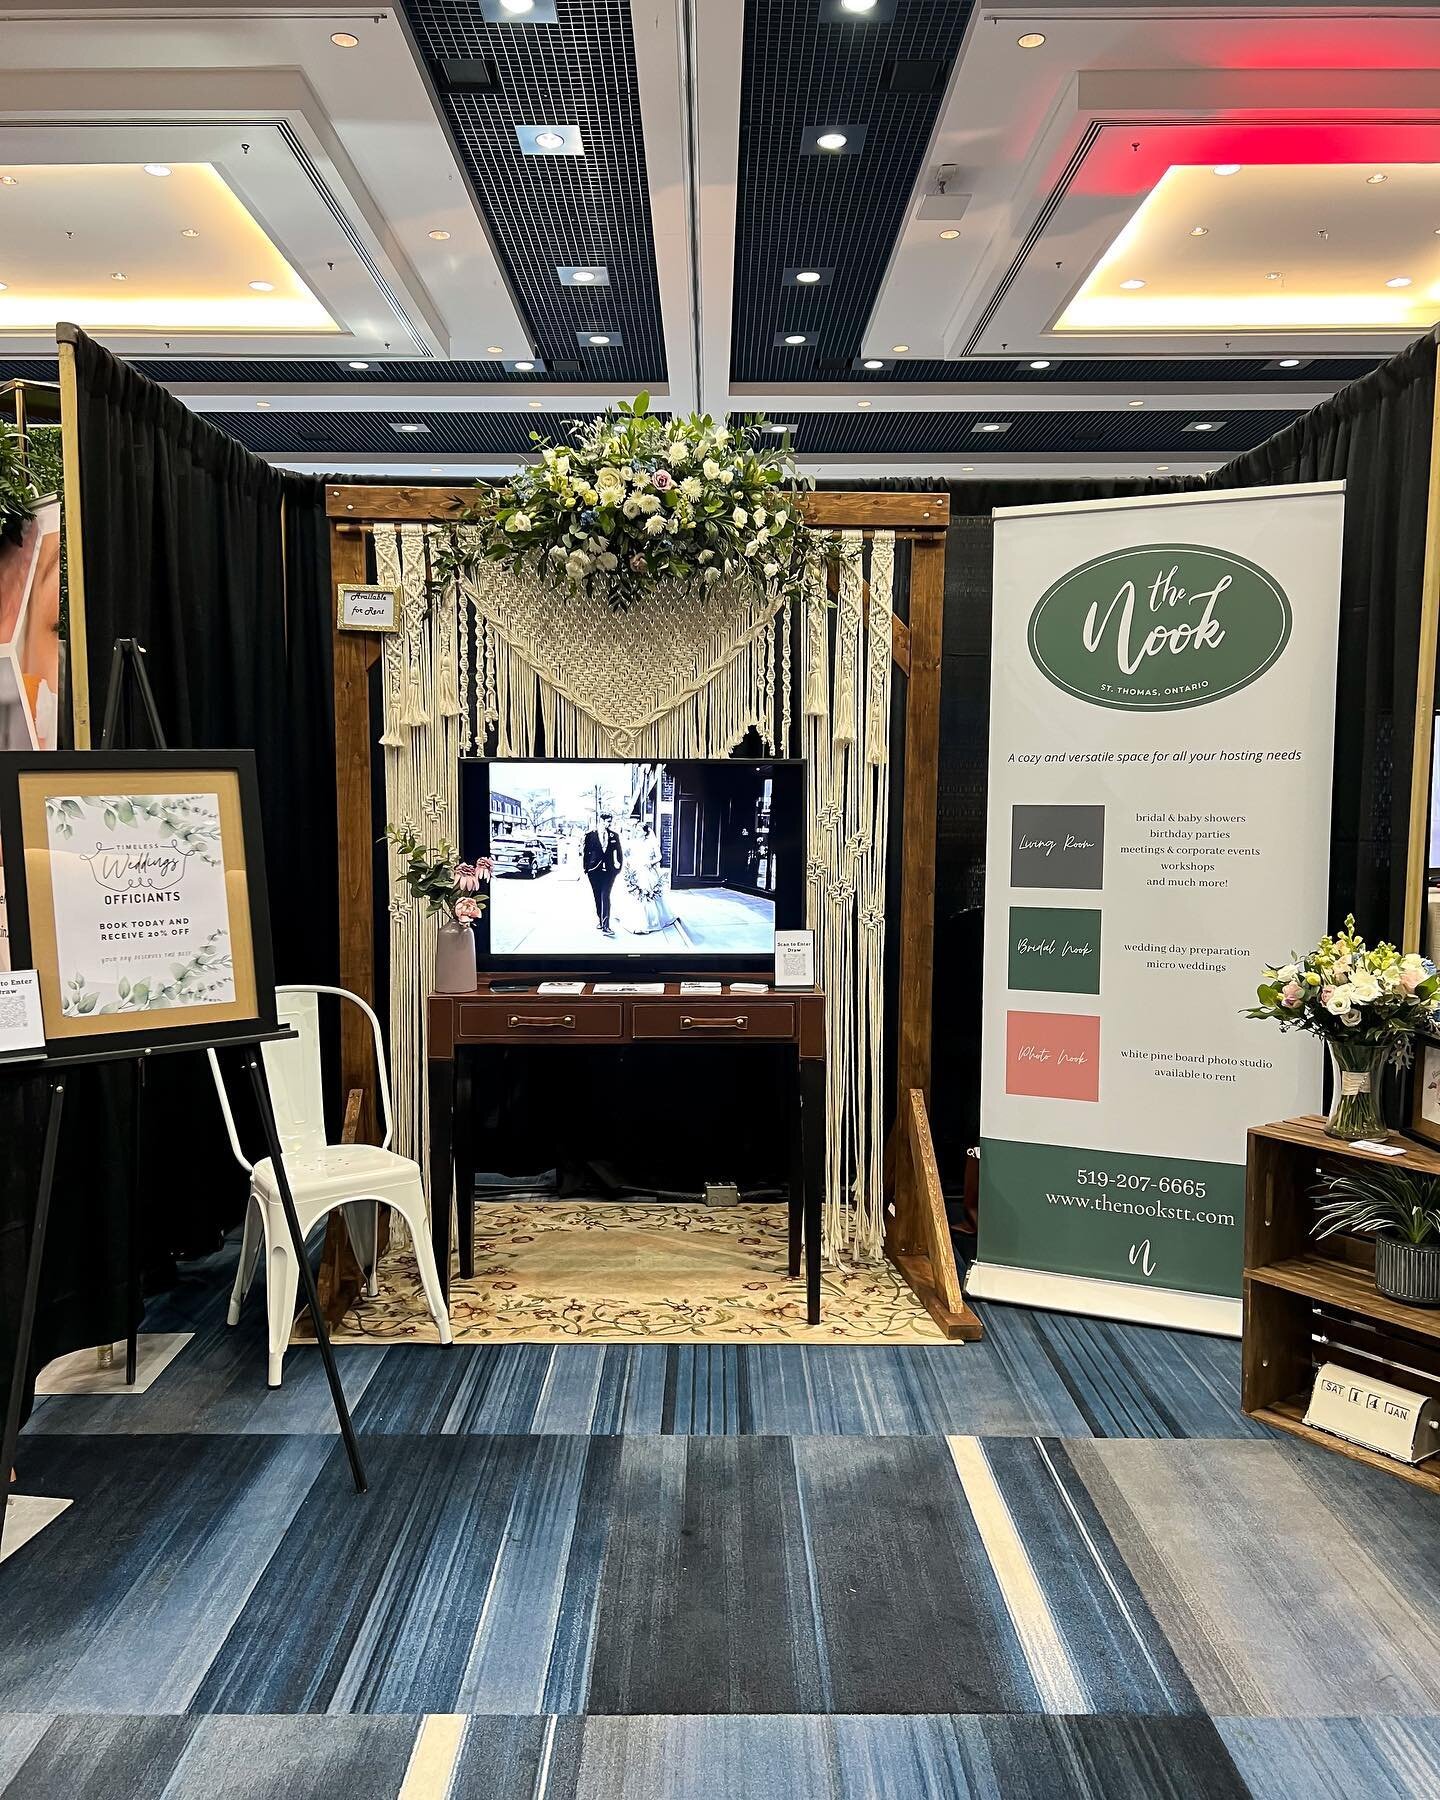 ✨ LONDON BRIDAL EXPO ✨

We&rsquo;re all set up at the @londonbridalexpo this weekend! If you&rsquo;re planning on coming stop and say hi! 💍💐📷

We have quite a few micro weddings in our 2023 calendar already and we can&rsquo;t wait to meet more ama